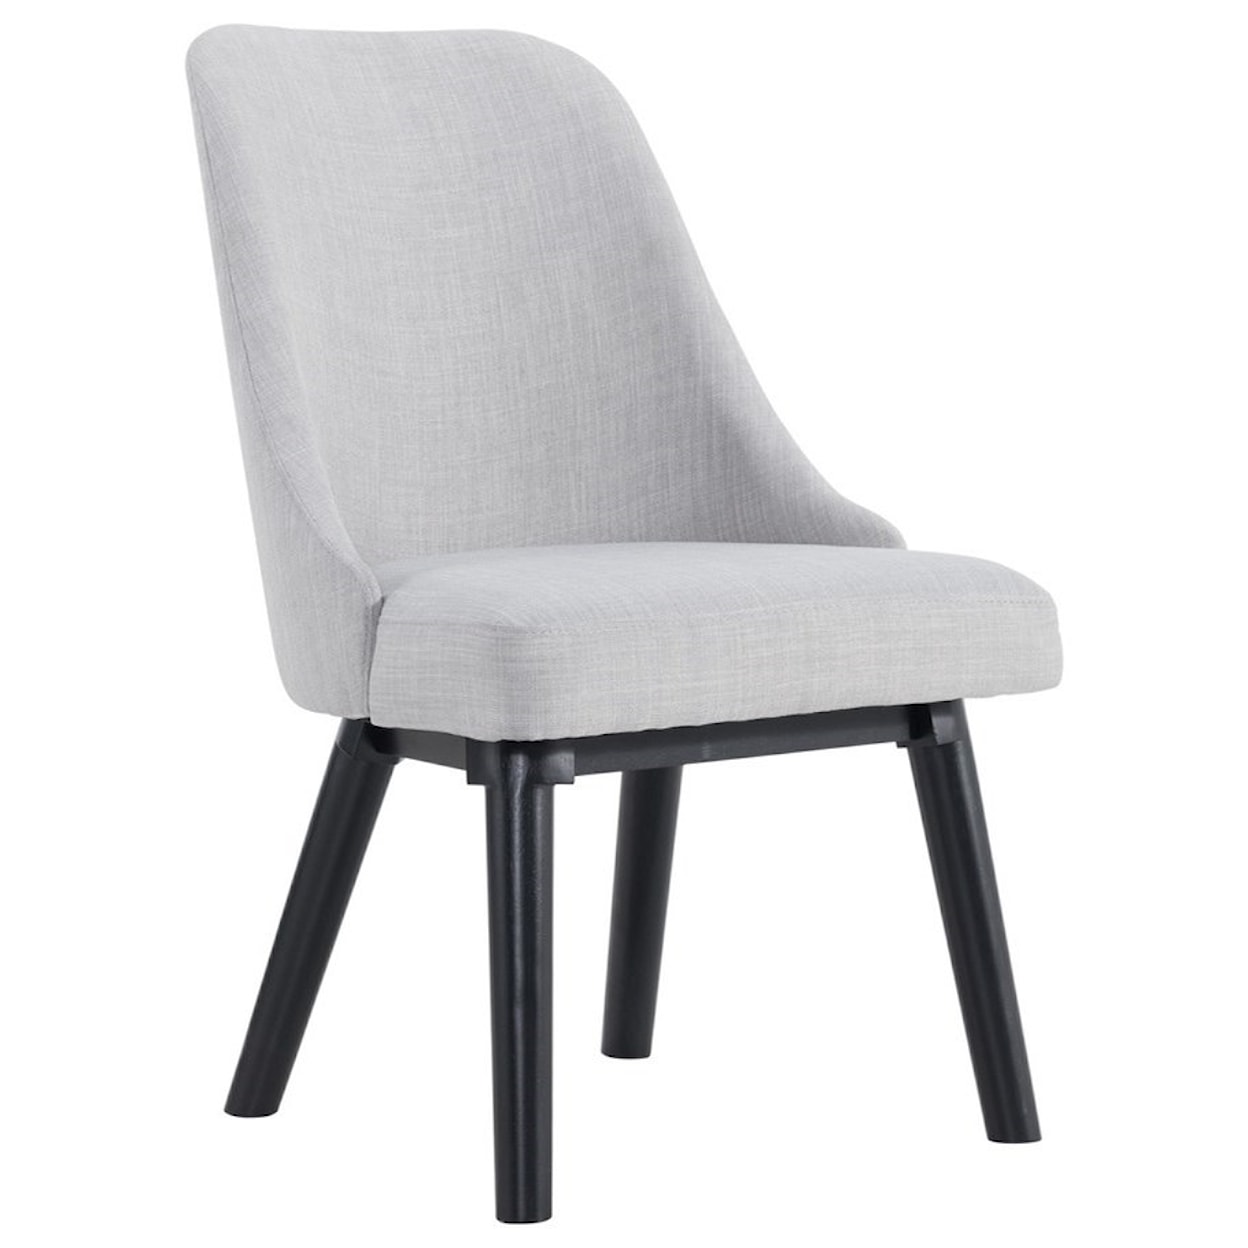 Intercon Foundry Upholstered Dining Chair